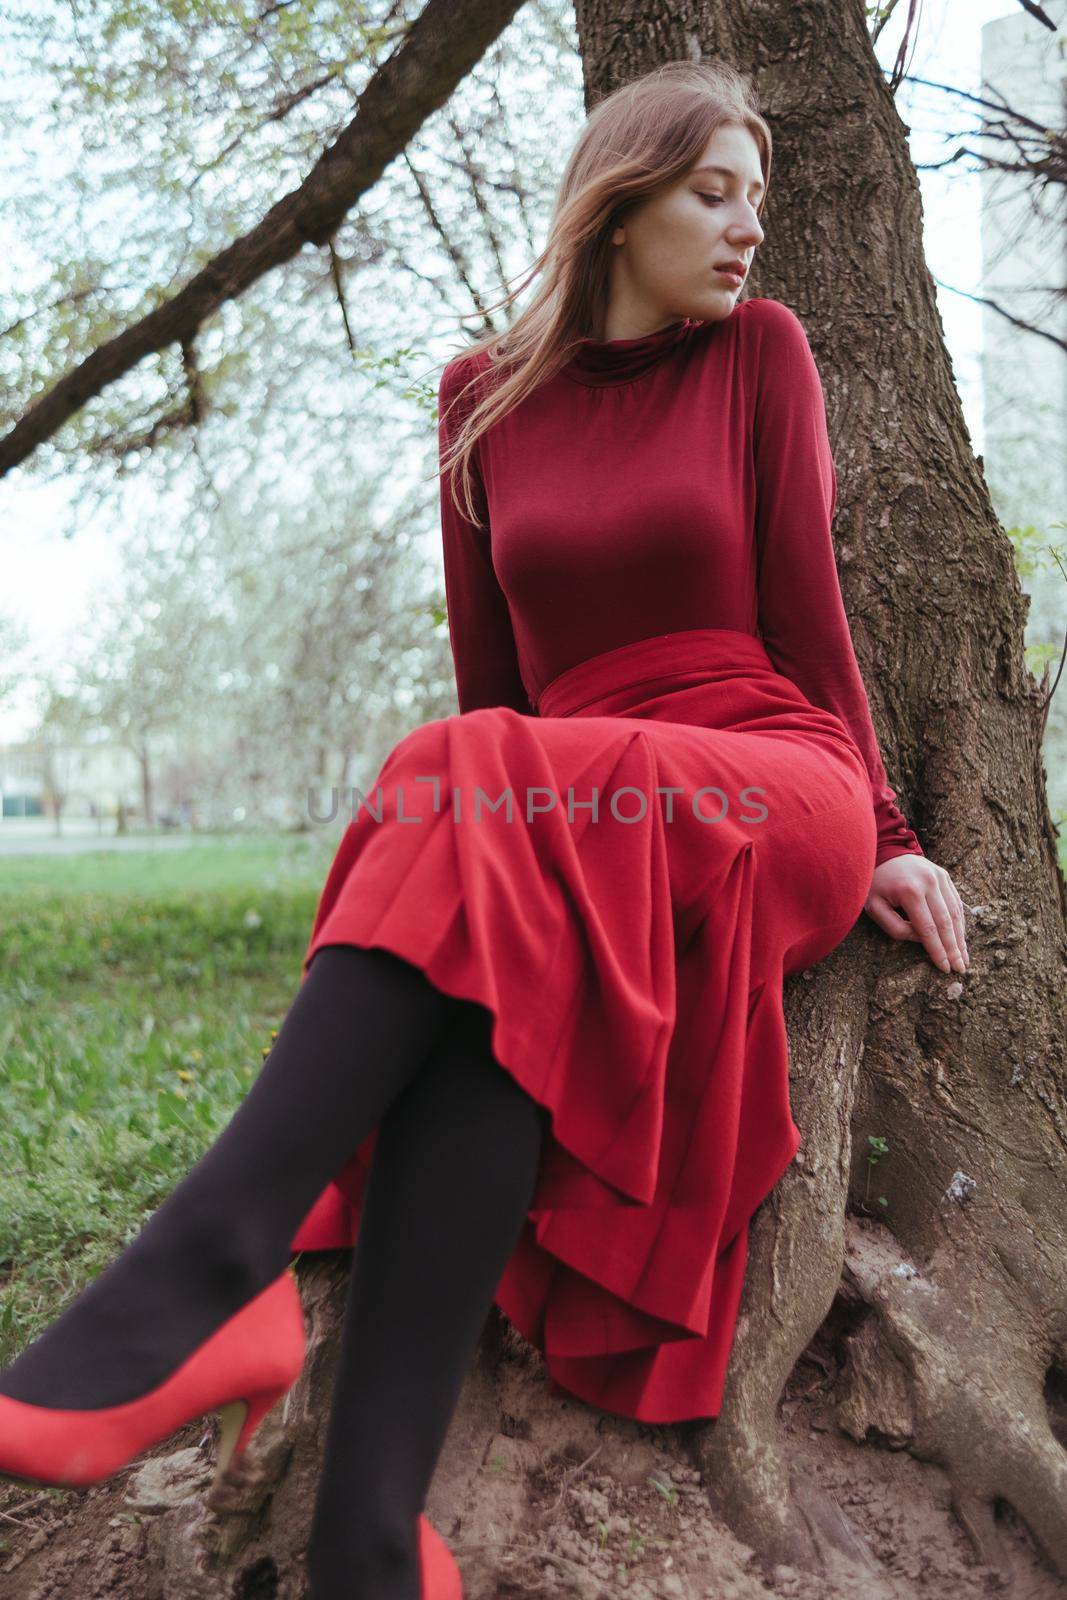 a girl in red sits under a tree in the spring forest and enjoys nature